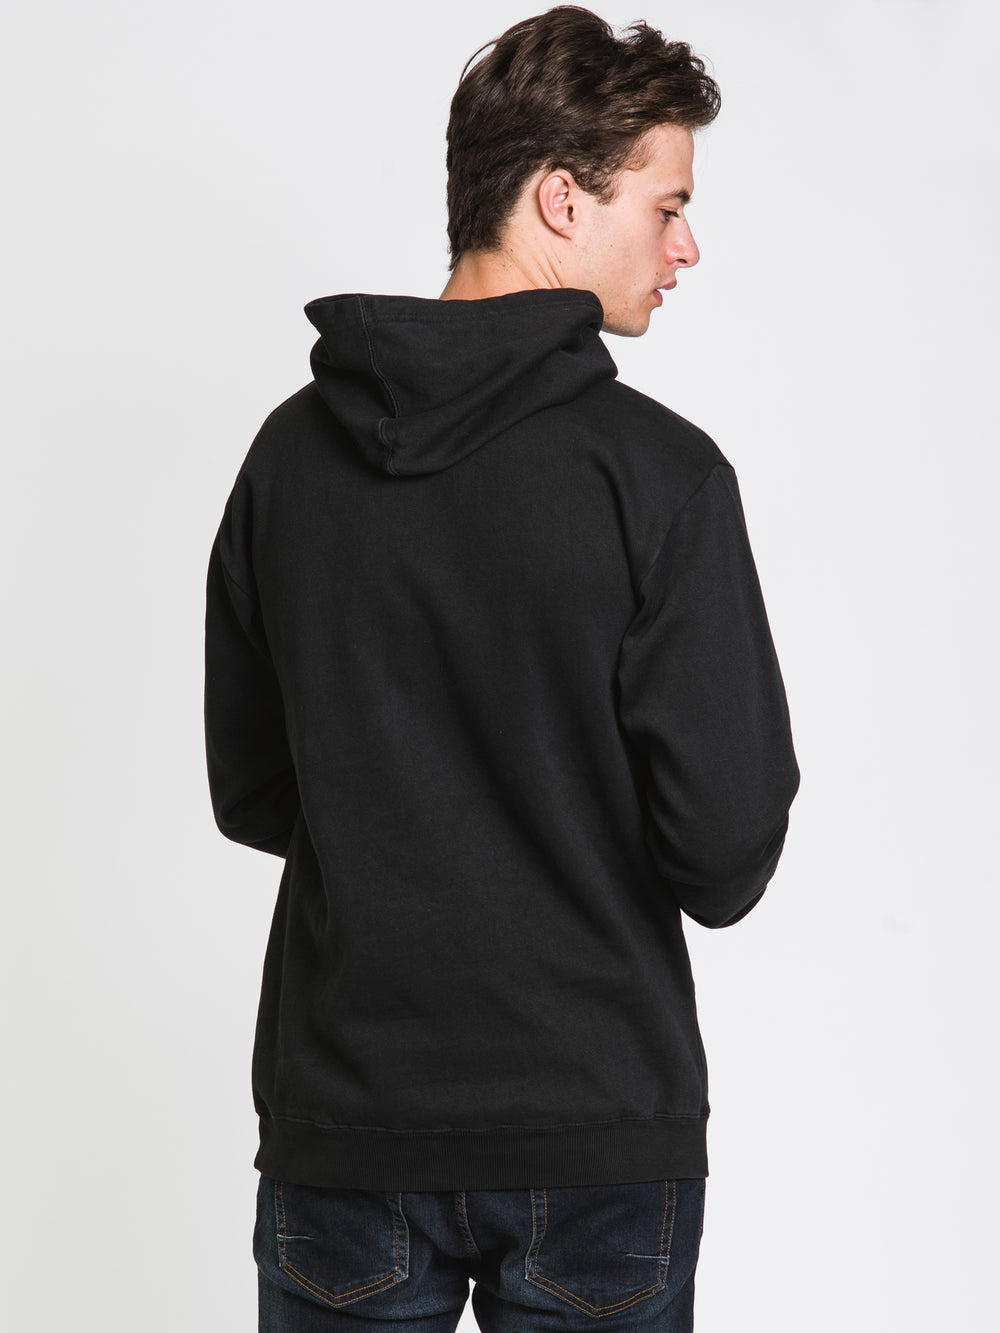 CROOKS & CASTLES SUPREME STYLE PULLOVER HOODIE  - CLEARANCE